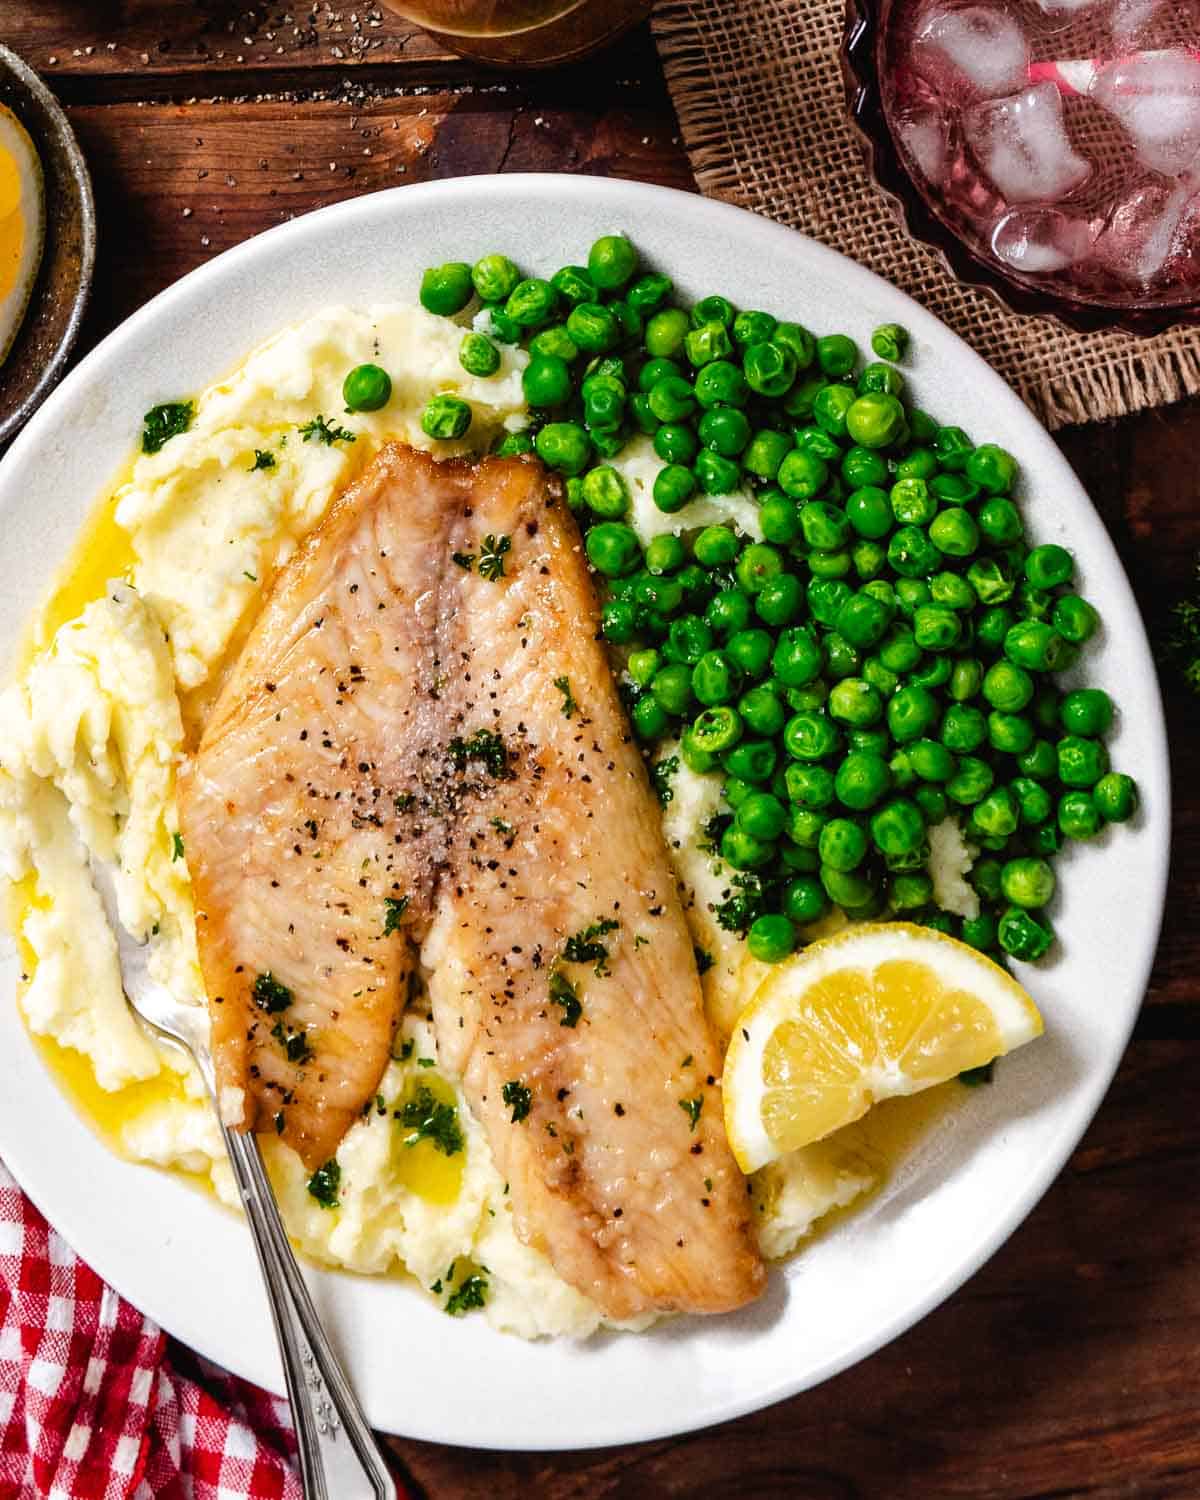 Fish with mashed potatoes and peas.